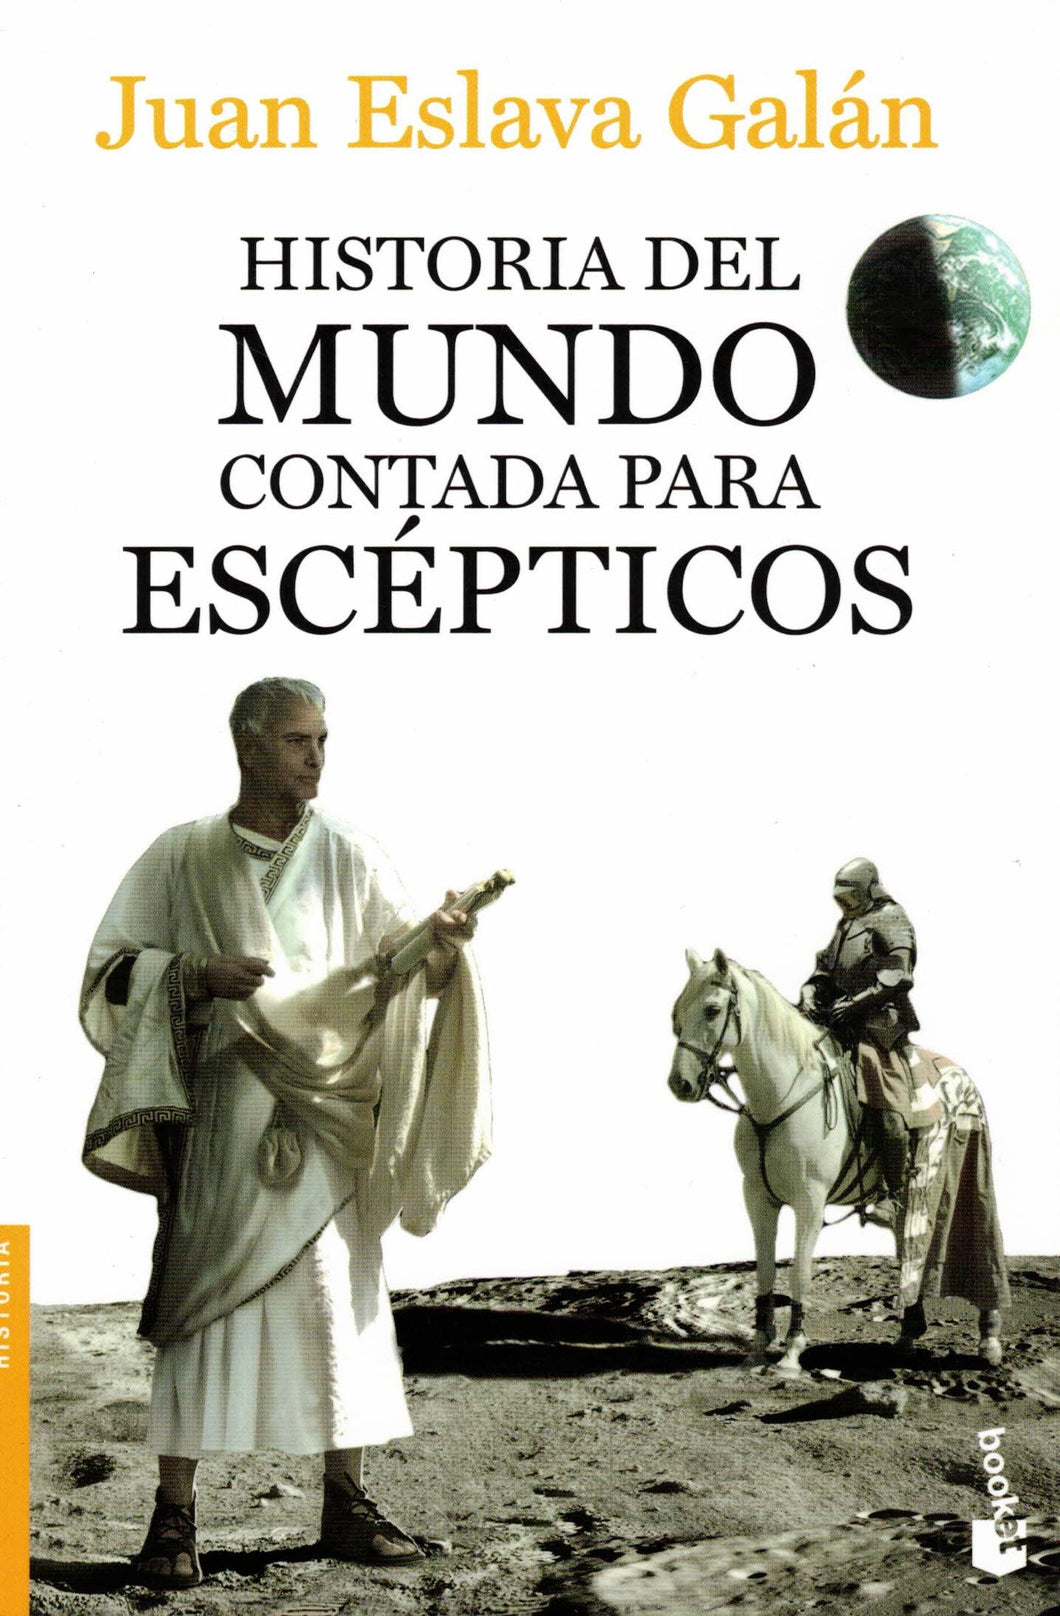 History of the world told for skeptics C-85 (SOFT COVER BOOK) Juan Eslava Galán (very good second-hand)